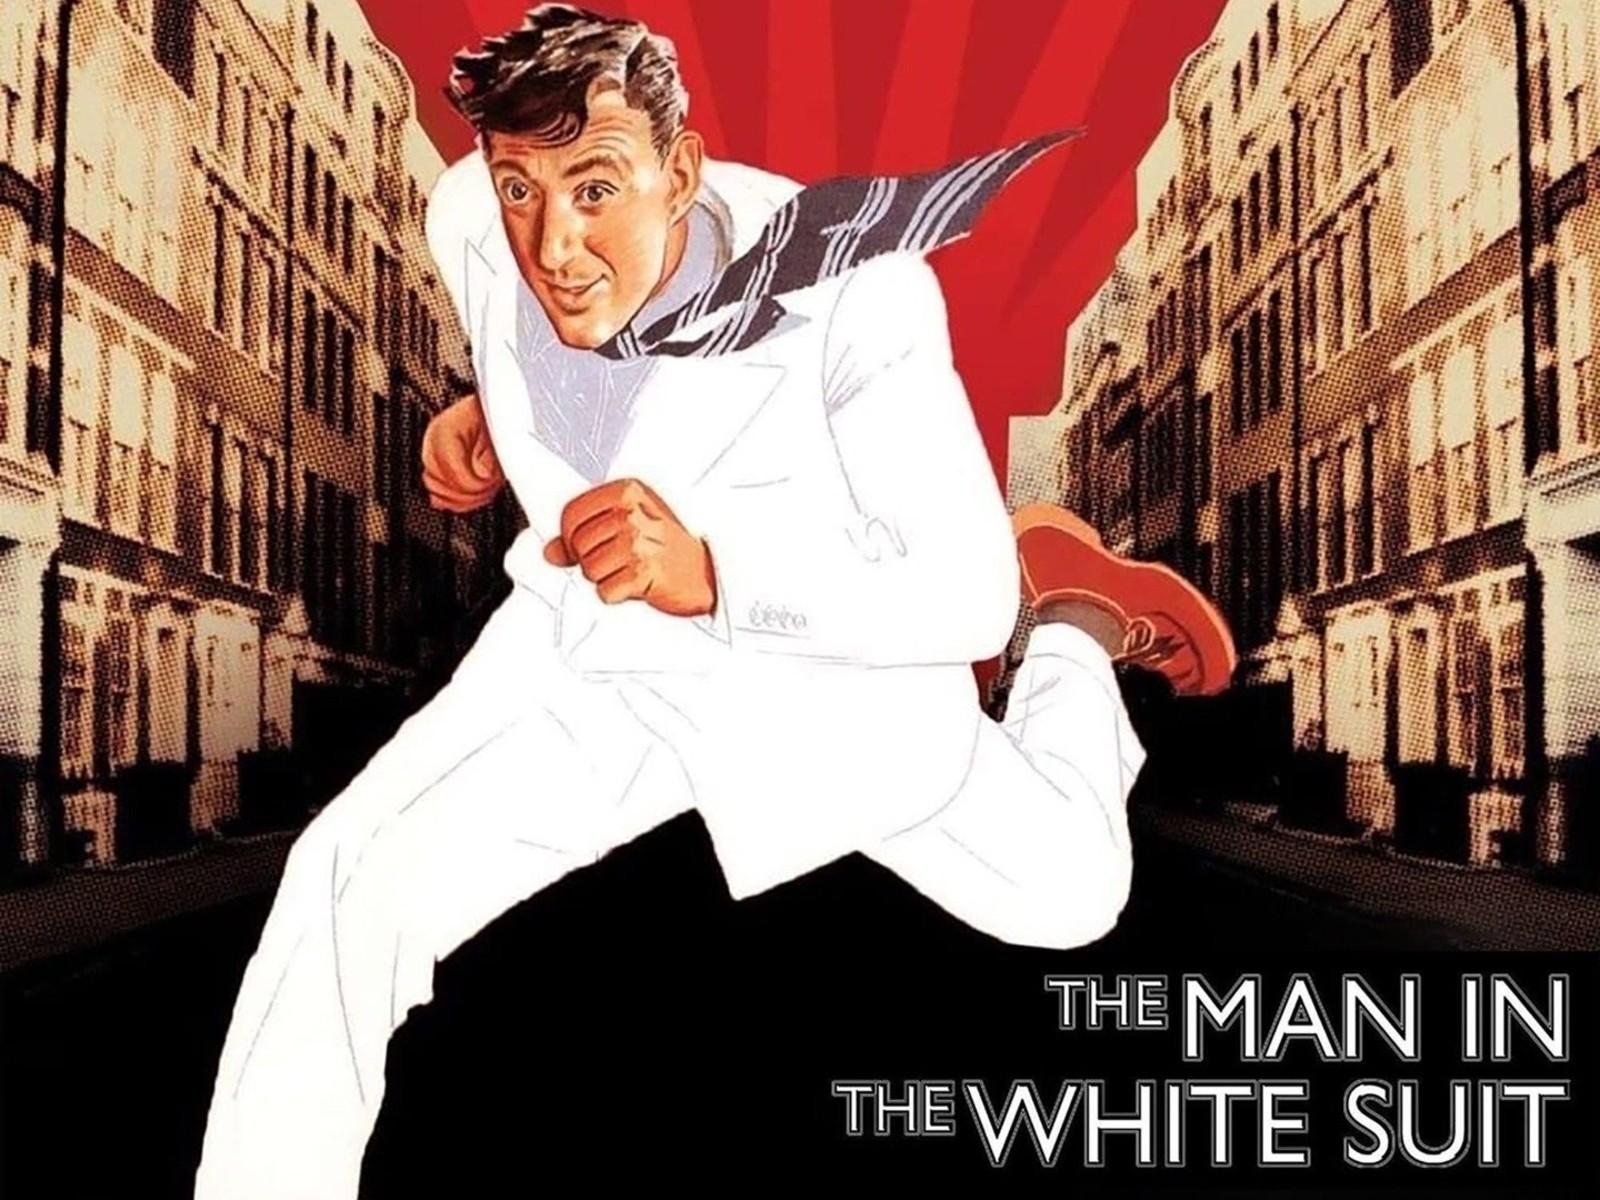 The Man in the White Suit + Q&A